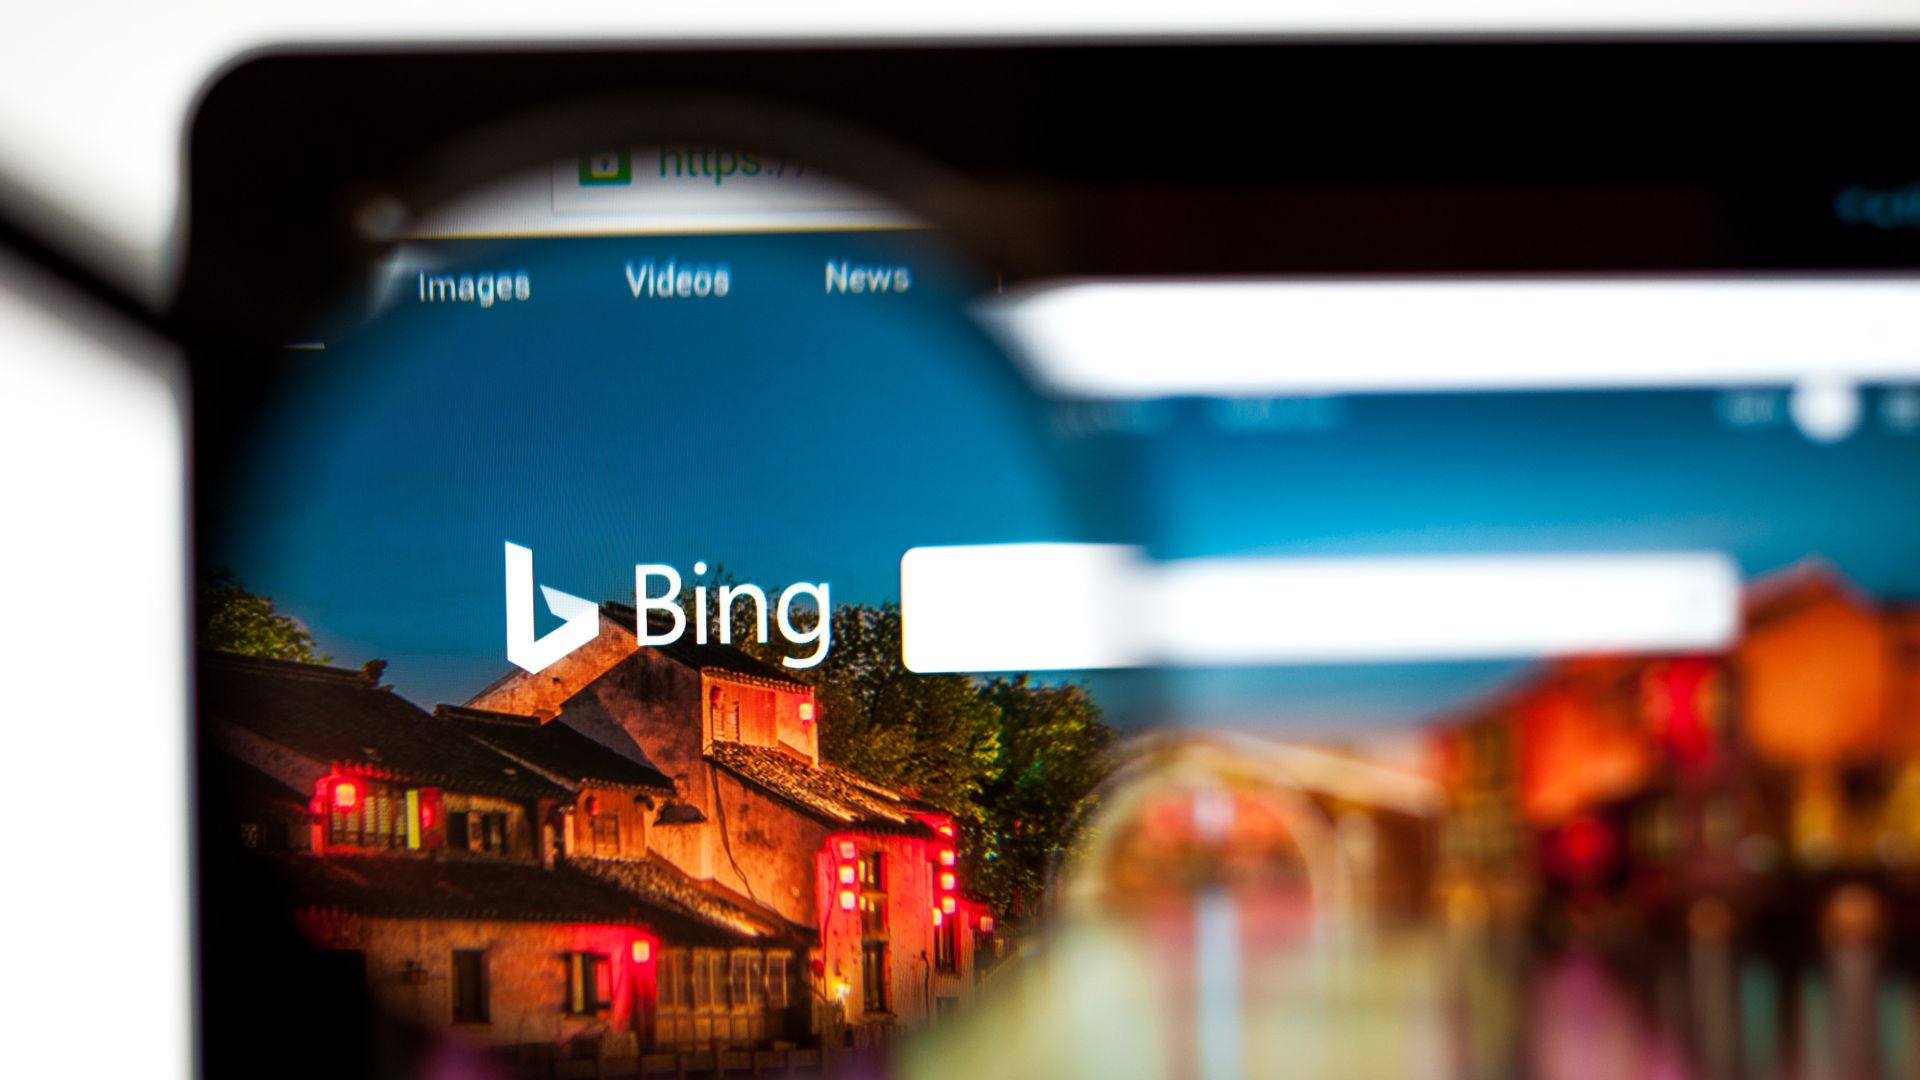 microsoft, windows, microsoft, microsoft is getting desperate for more bing users – but this annoying edge pop-up is definitely not the way to go about it